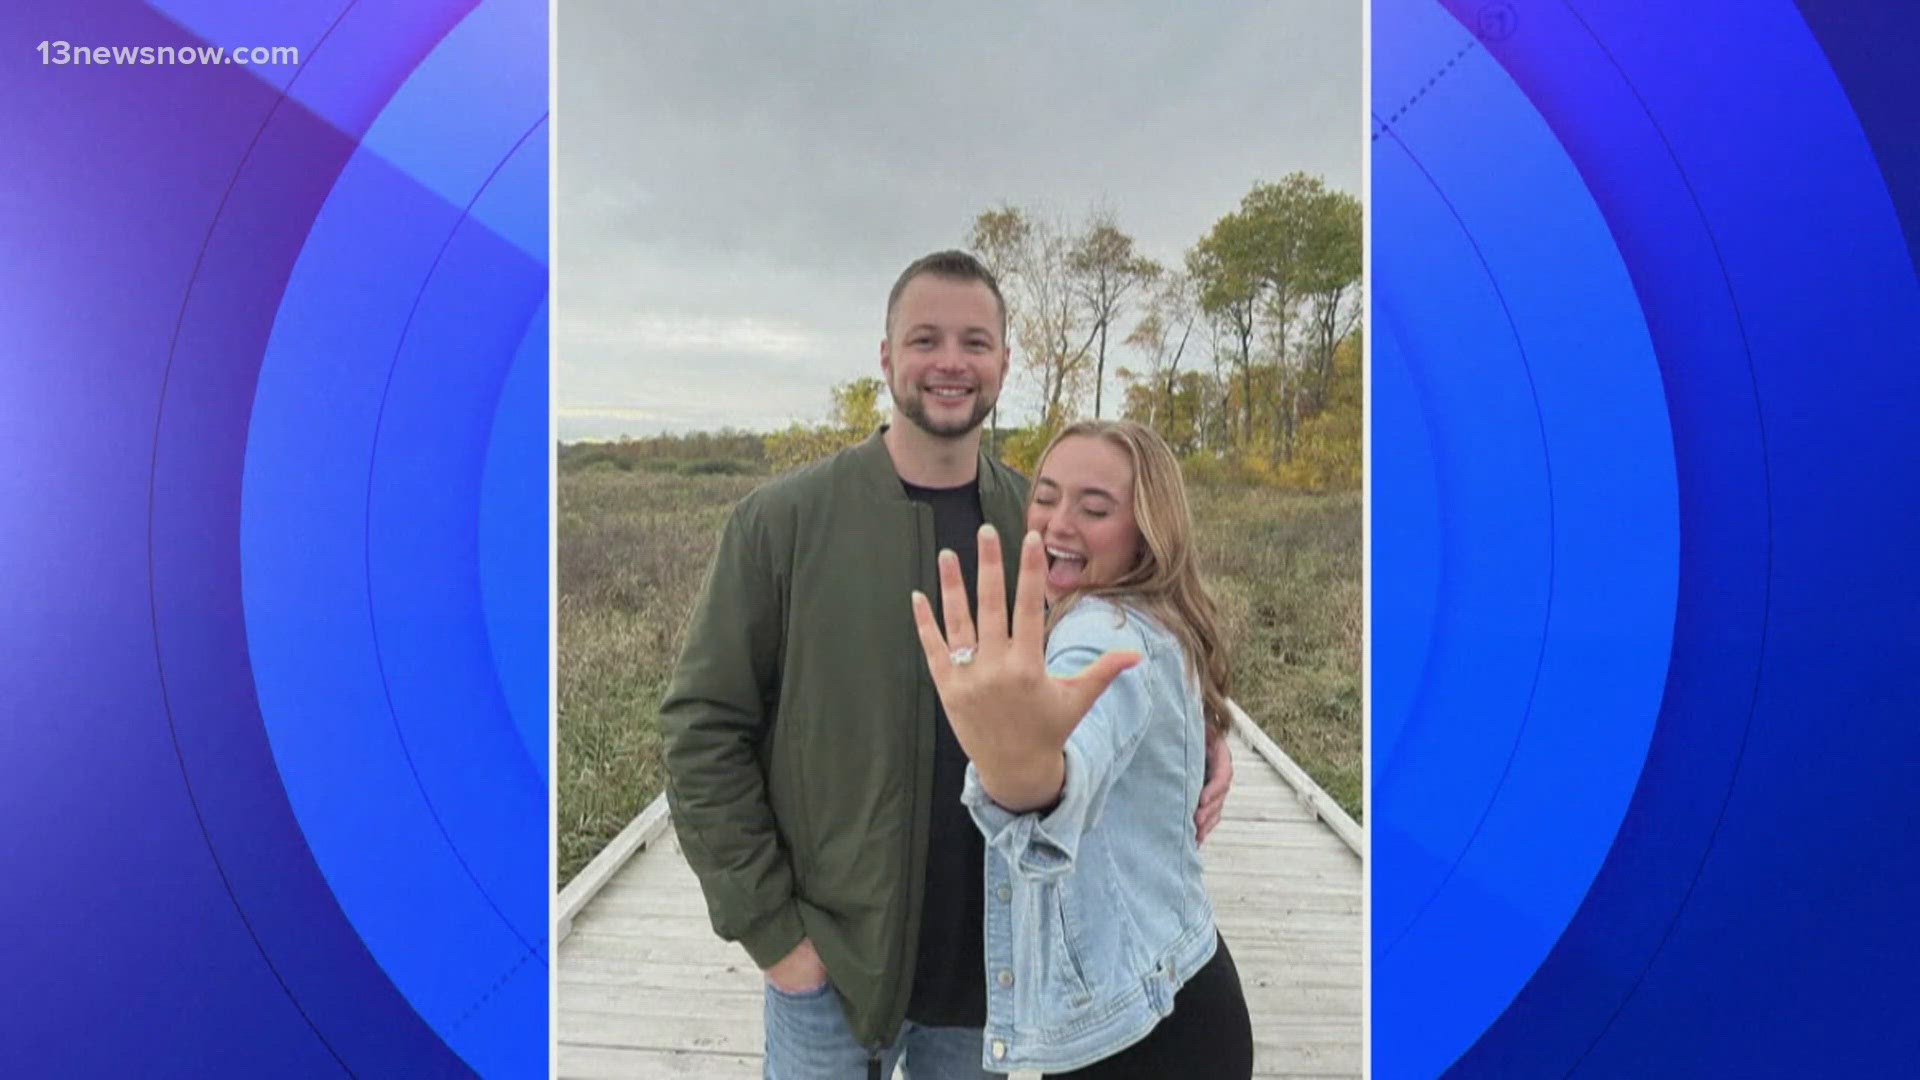 Alec and Hannah of Blaine, Minnesota just got engaged, and it's all thanks to an order on a food delivery app.